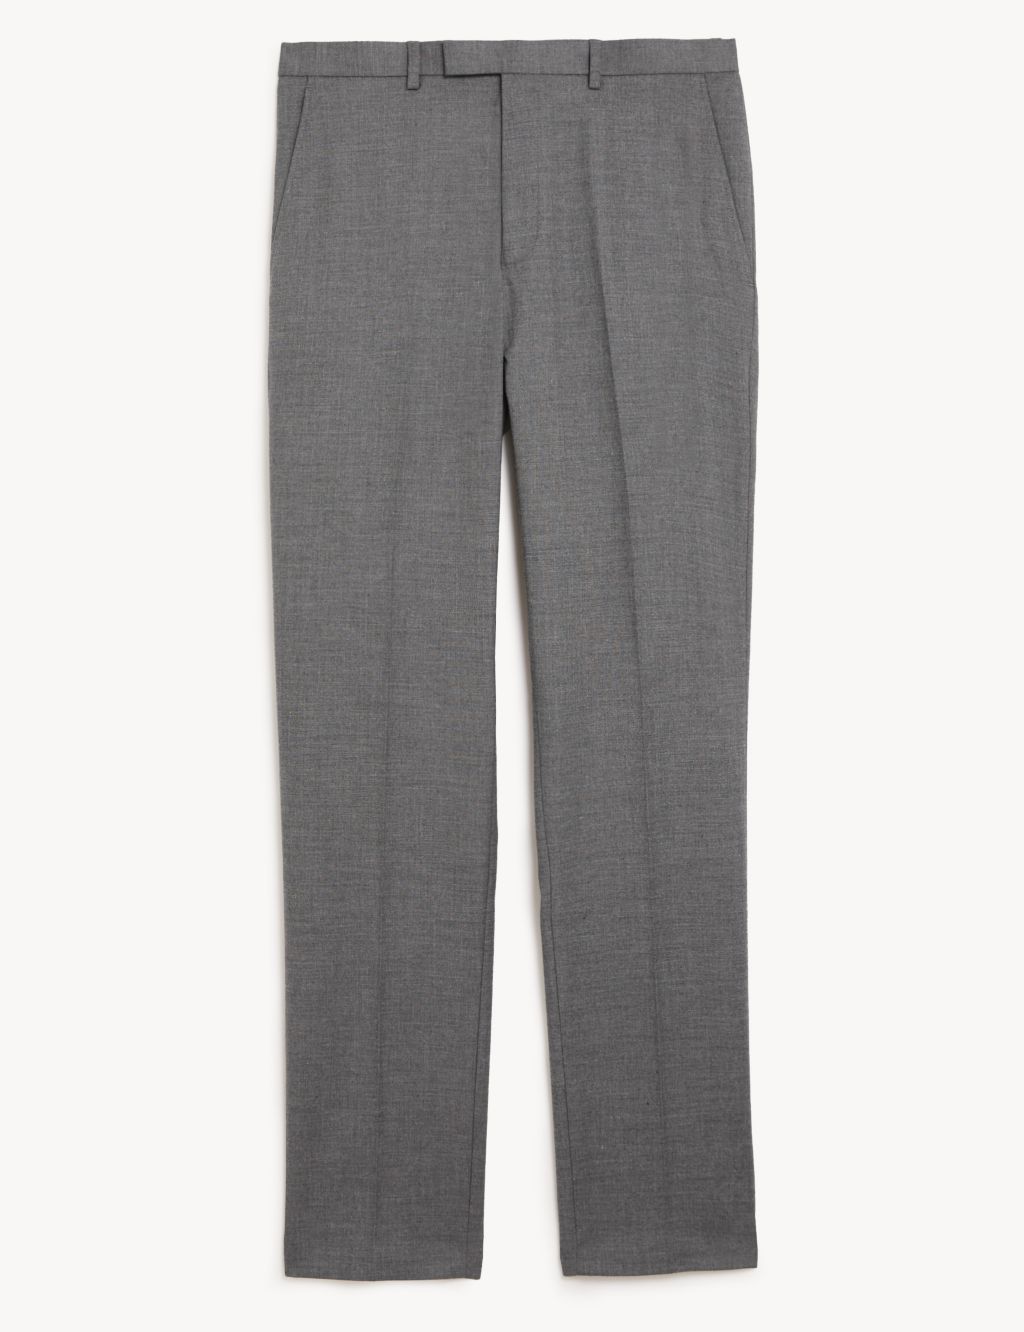 Slim Fit Sharkskin Stretch Suit Trousers image 2